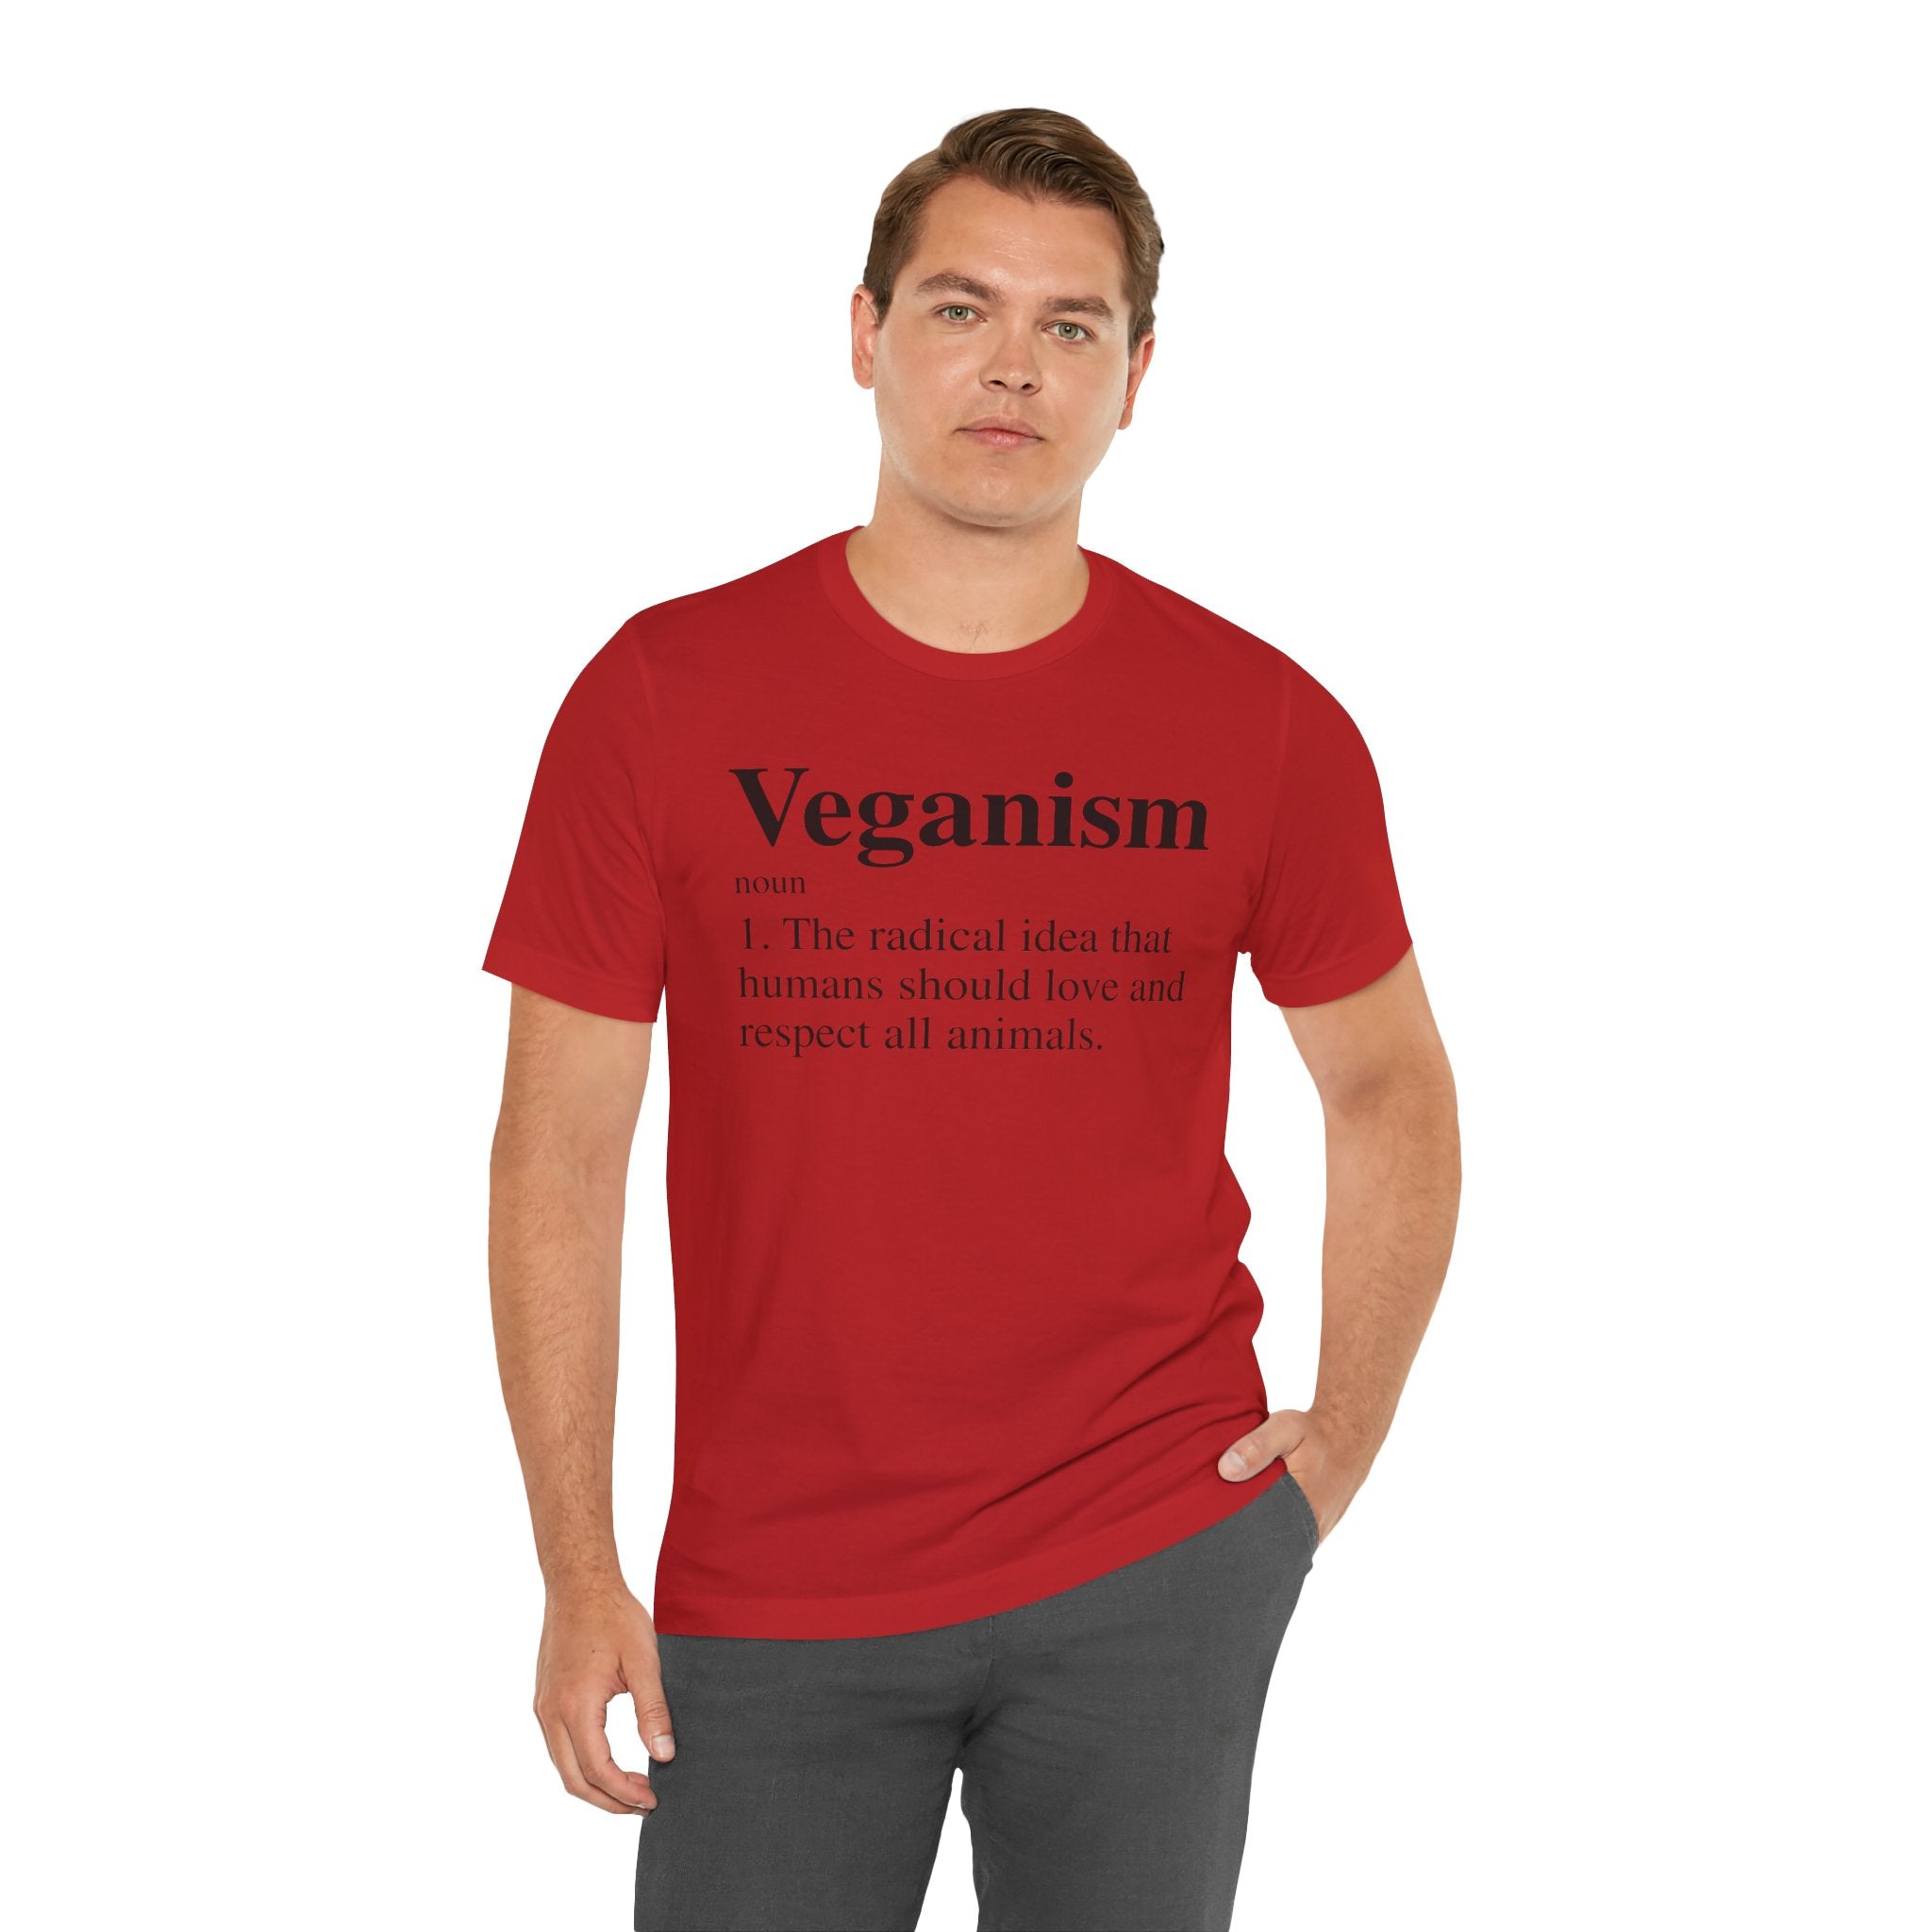 Man in a red Veganism T-Shirt with the word "veganism" and its definition printed on the front, standing against a white background.